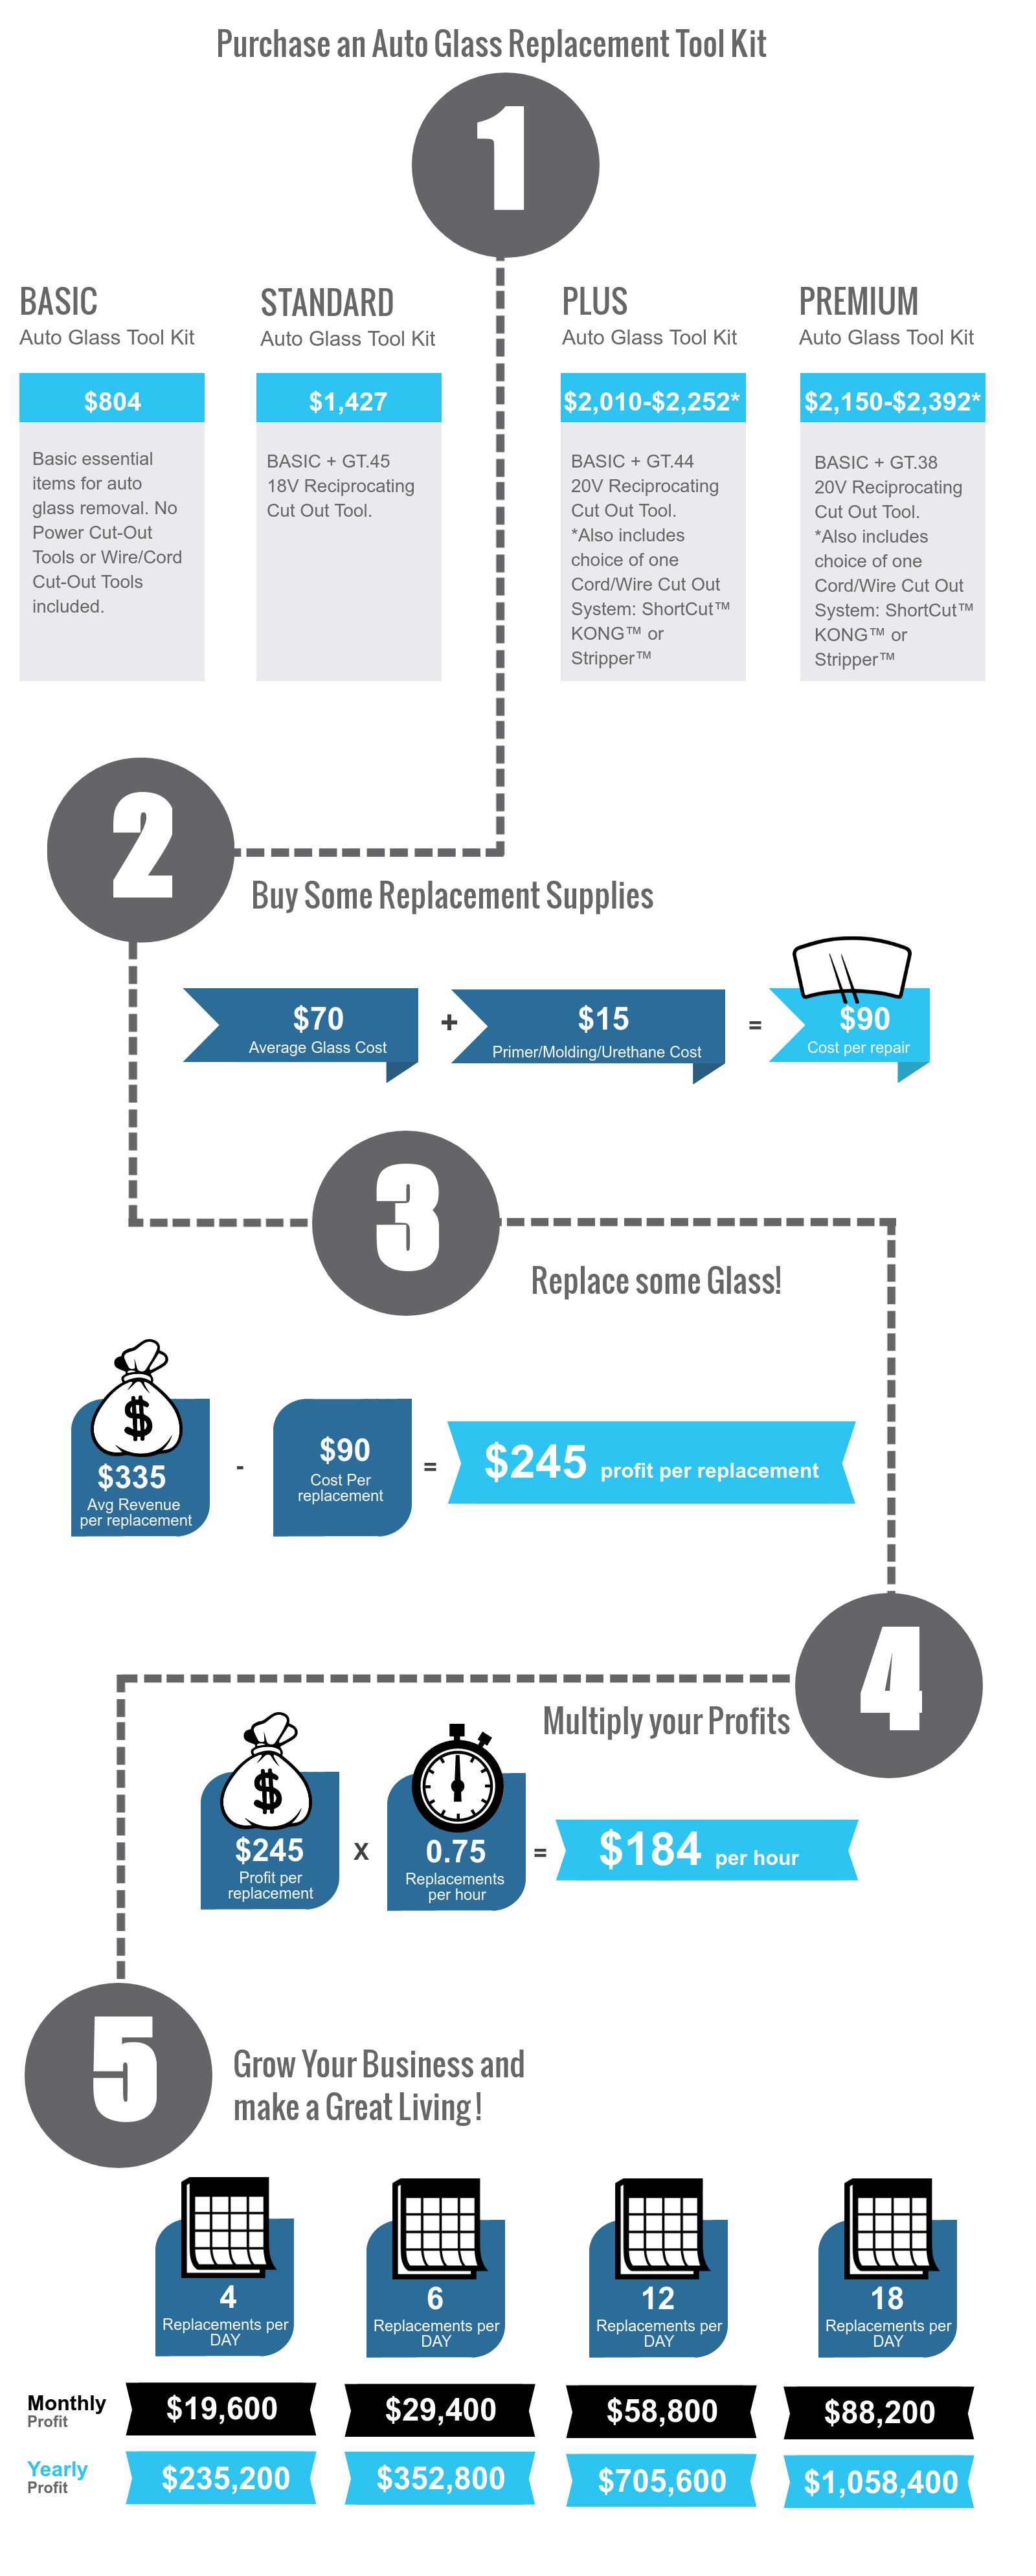 Auto Glass Replacement Revenue and Profit Potential Infographic